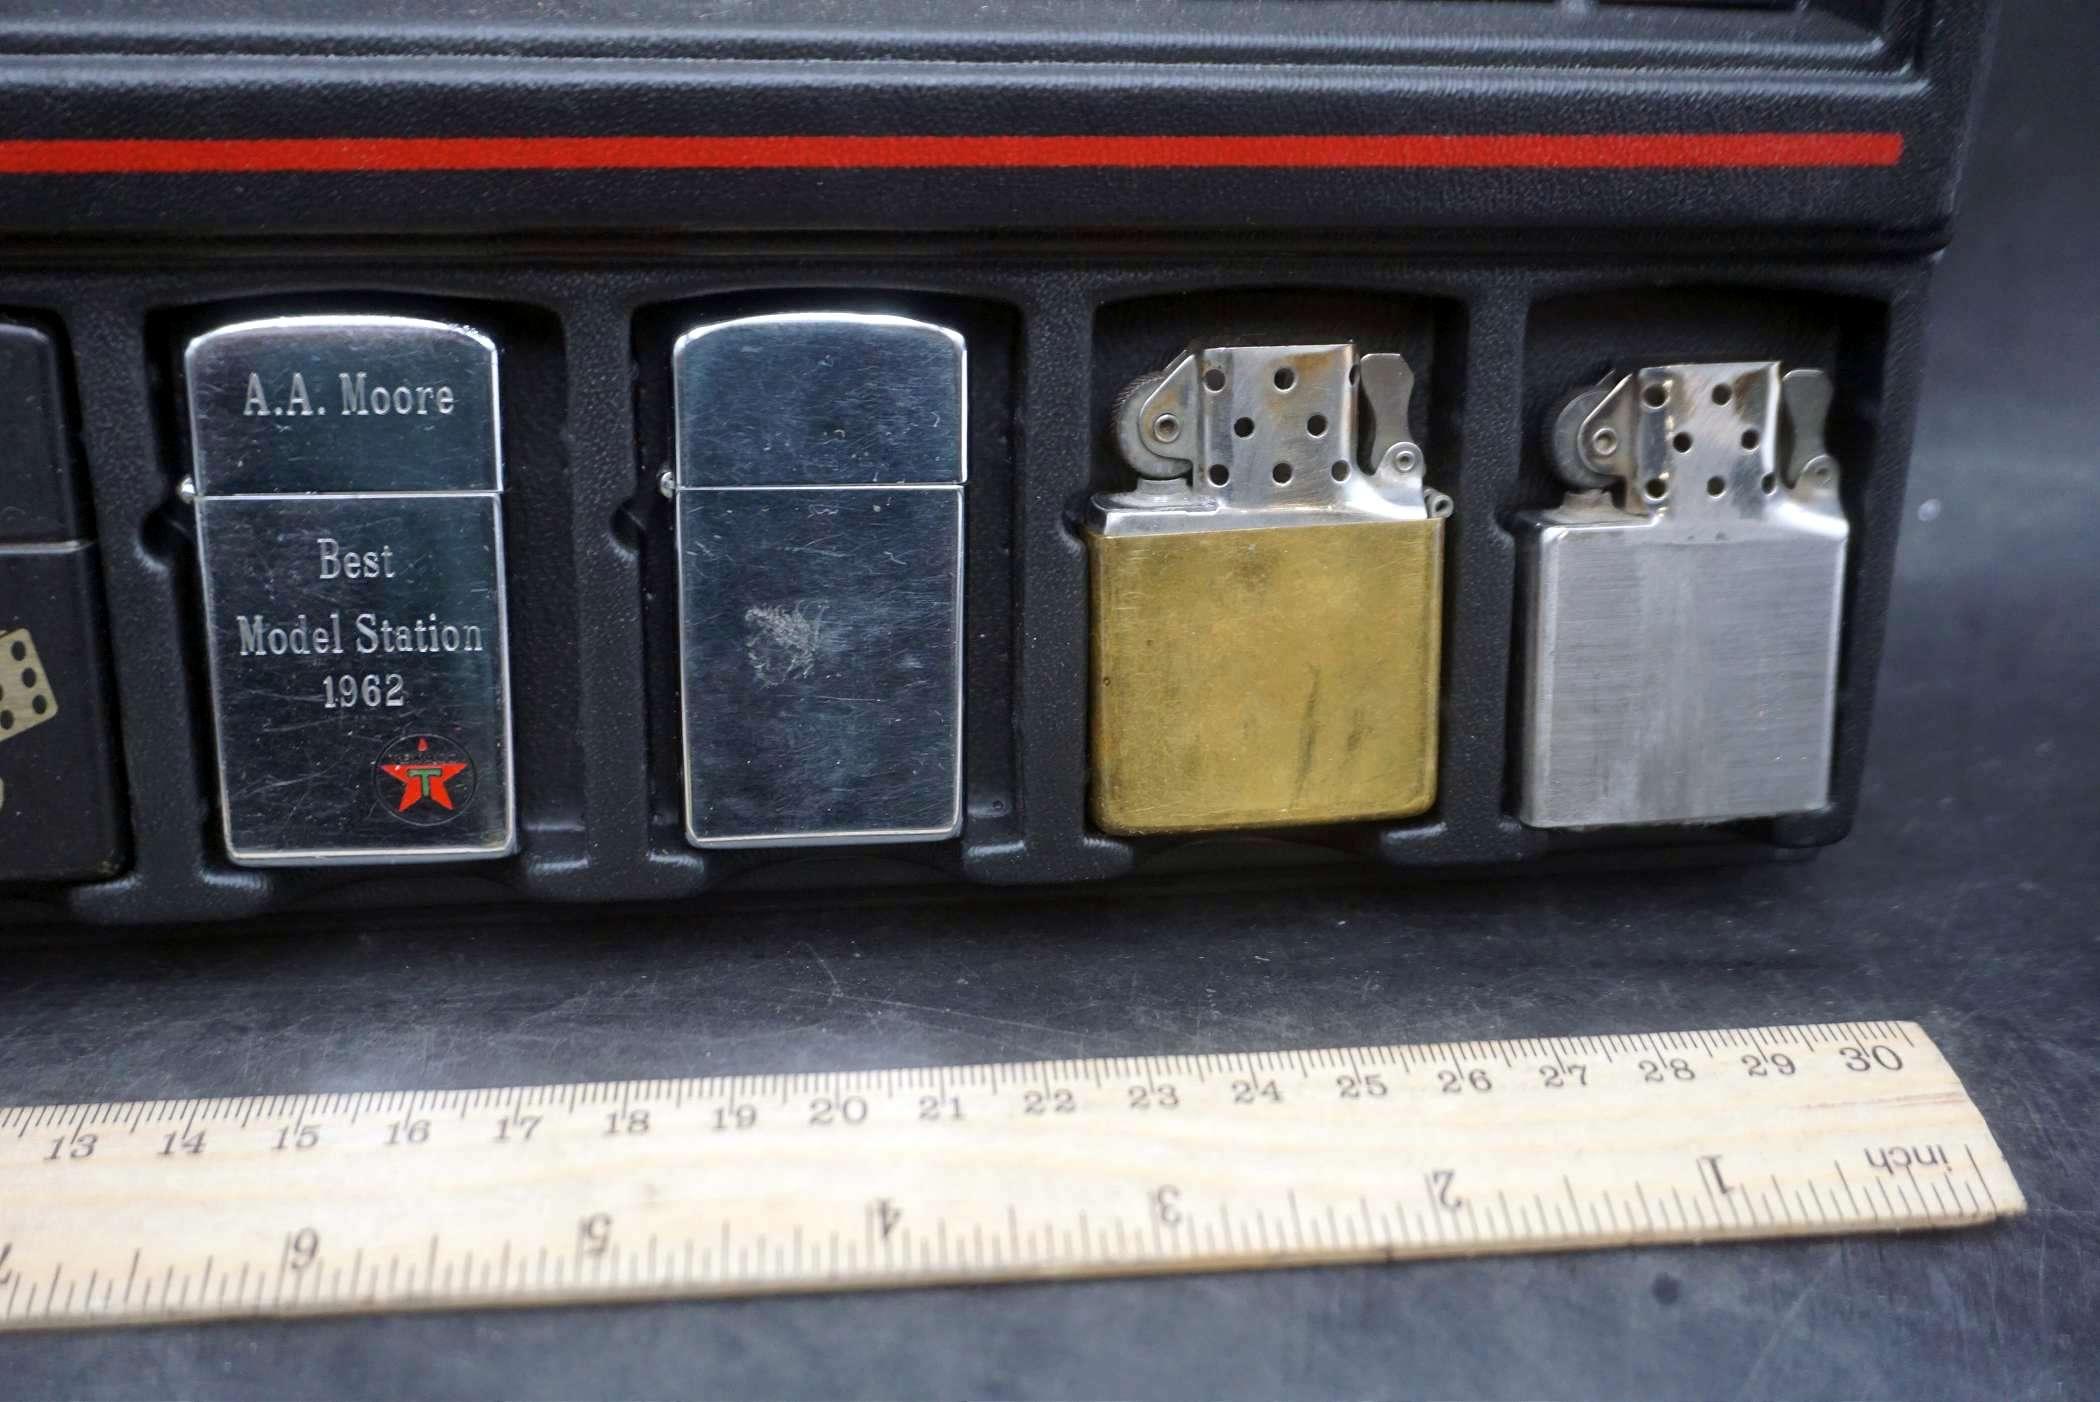 Zippo Collectible Lighters Set